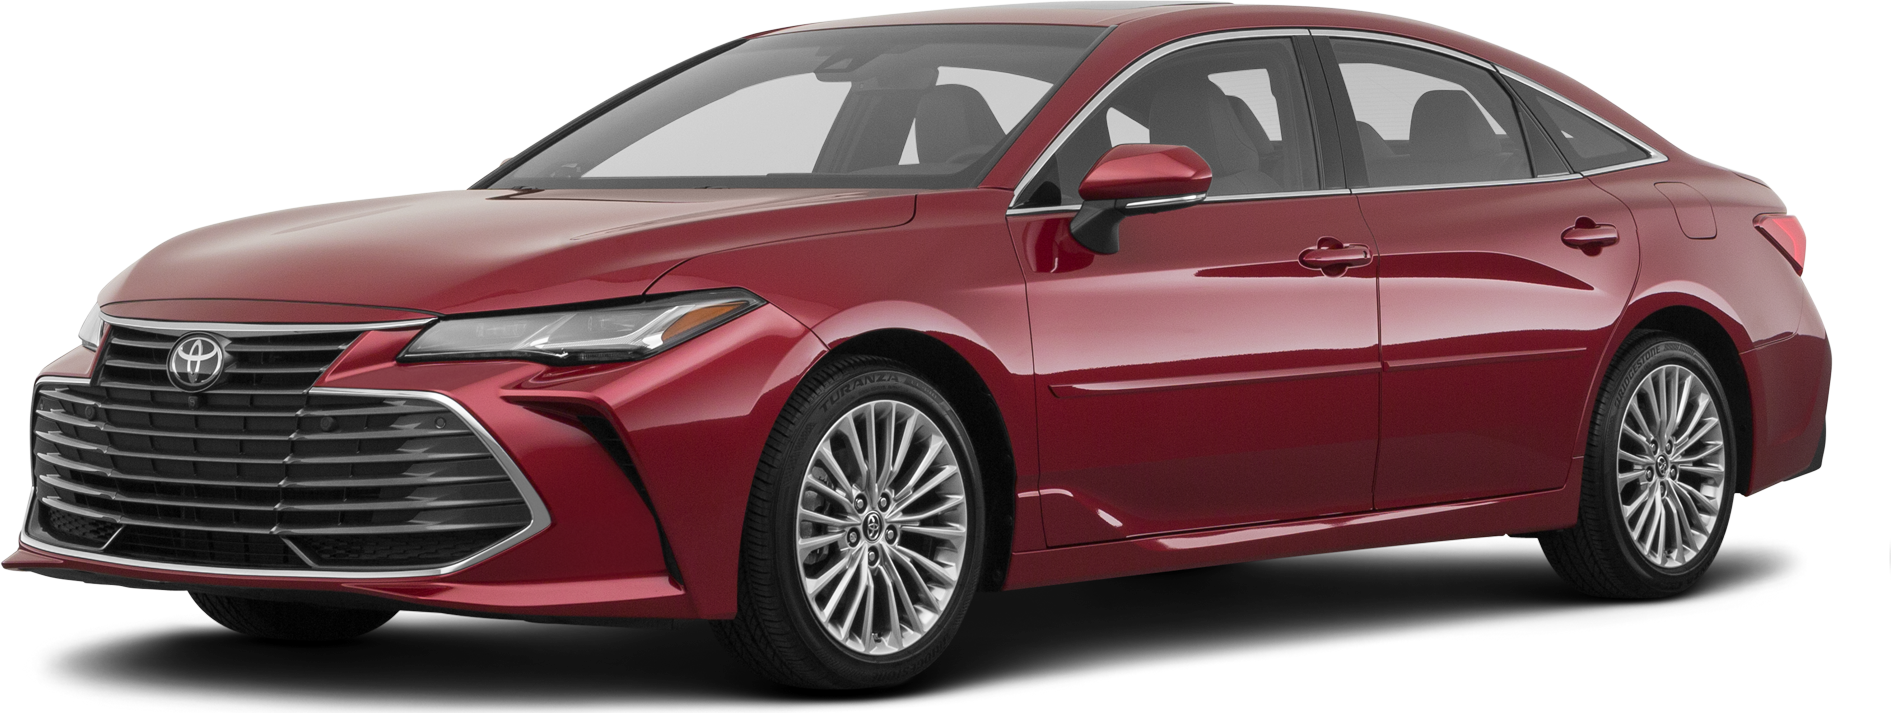 2022 Toyota Avalon Price, Value, Ratings & Reviews